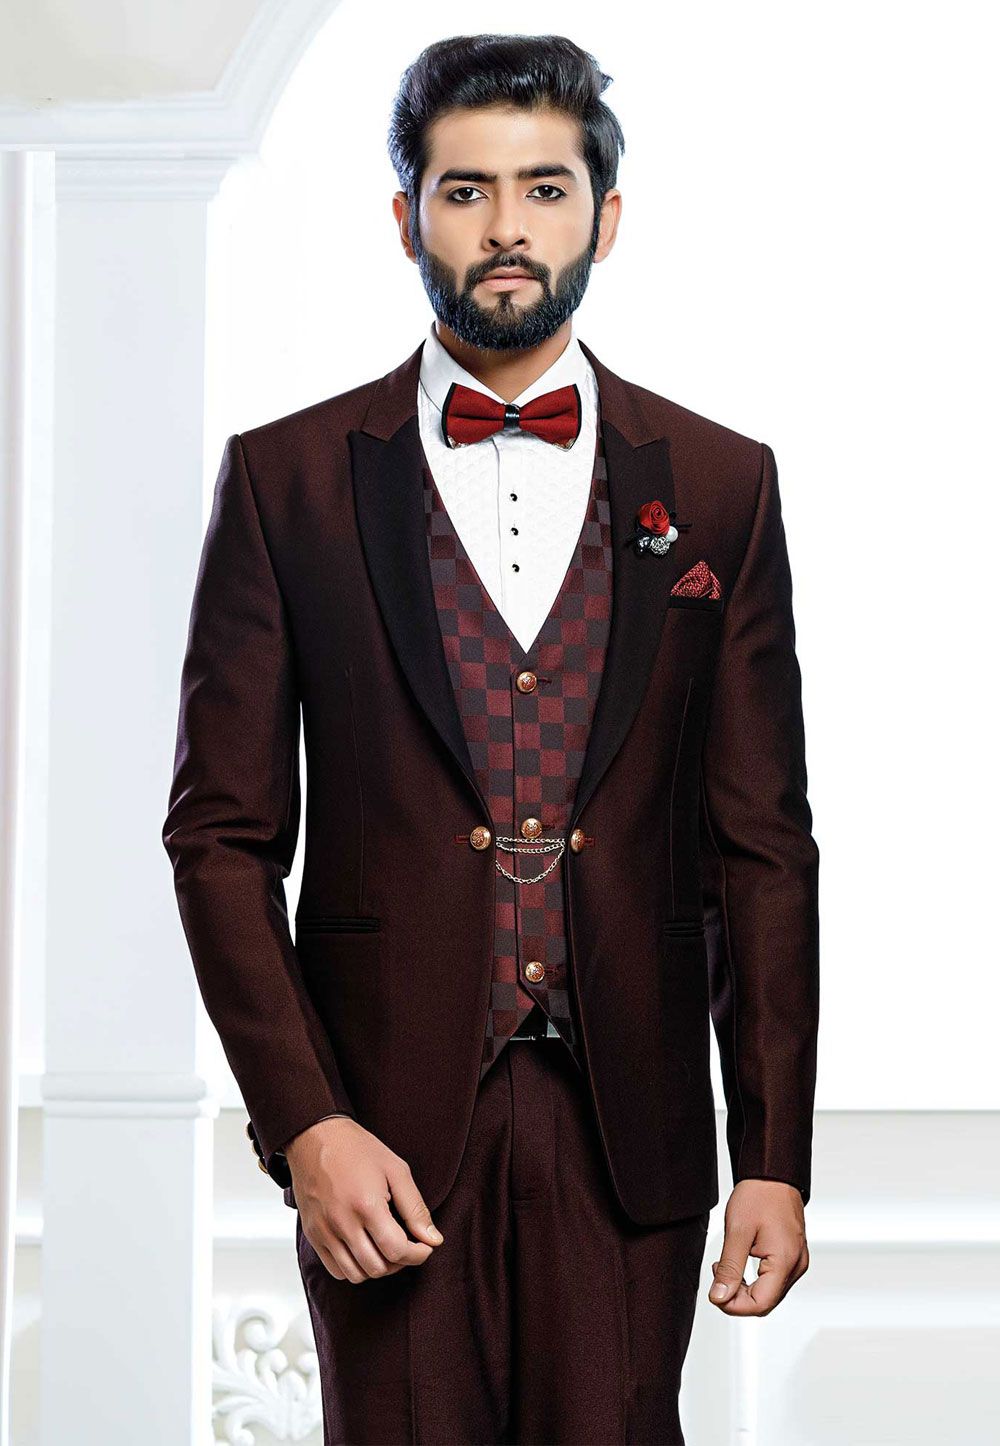 Men's Clothing - Buy Ethnic and Casual Wear Online for Men at G3Fashion  India